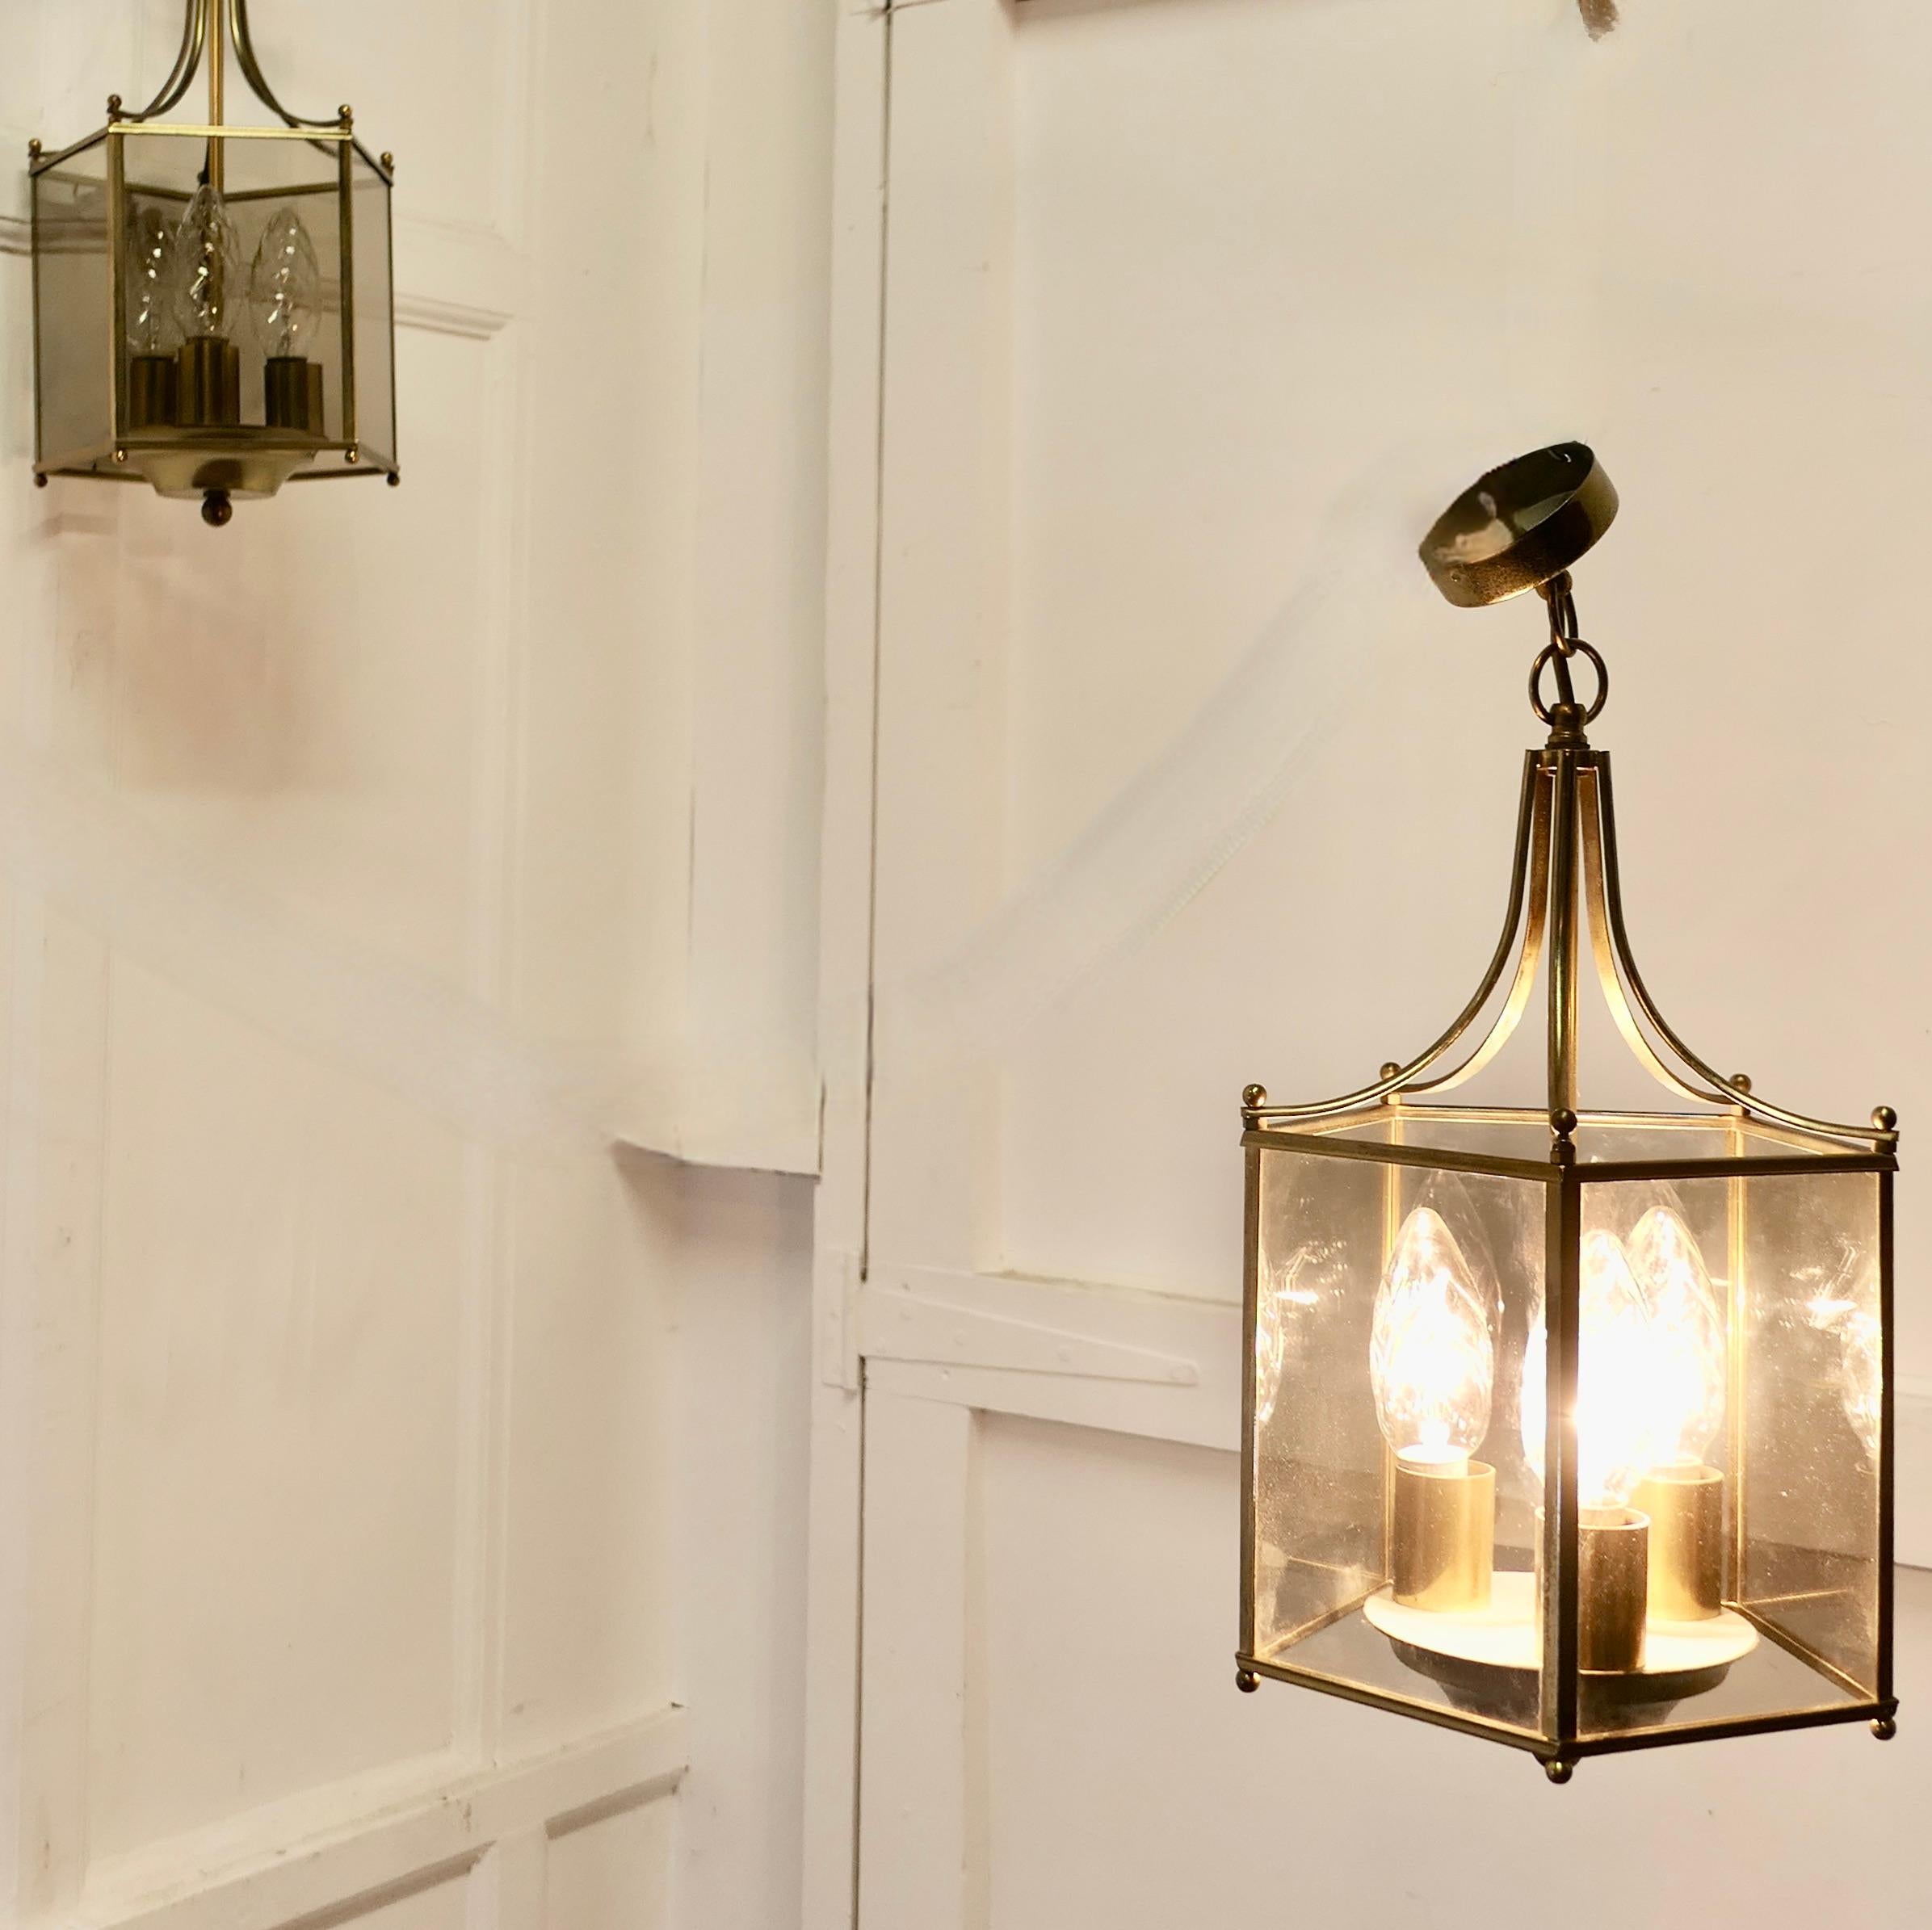 Superb Quality Pair of Art Deco Style Brass and Glass Lanterns  

These lovely lights have 5 flat smoked glass panels
The lanterns have a tripple candle sconce which gives a bright light when lit
The lantern frames are brass and hang from a rose  